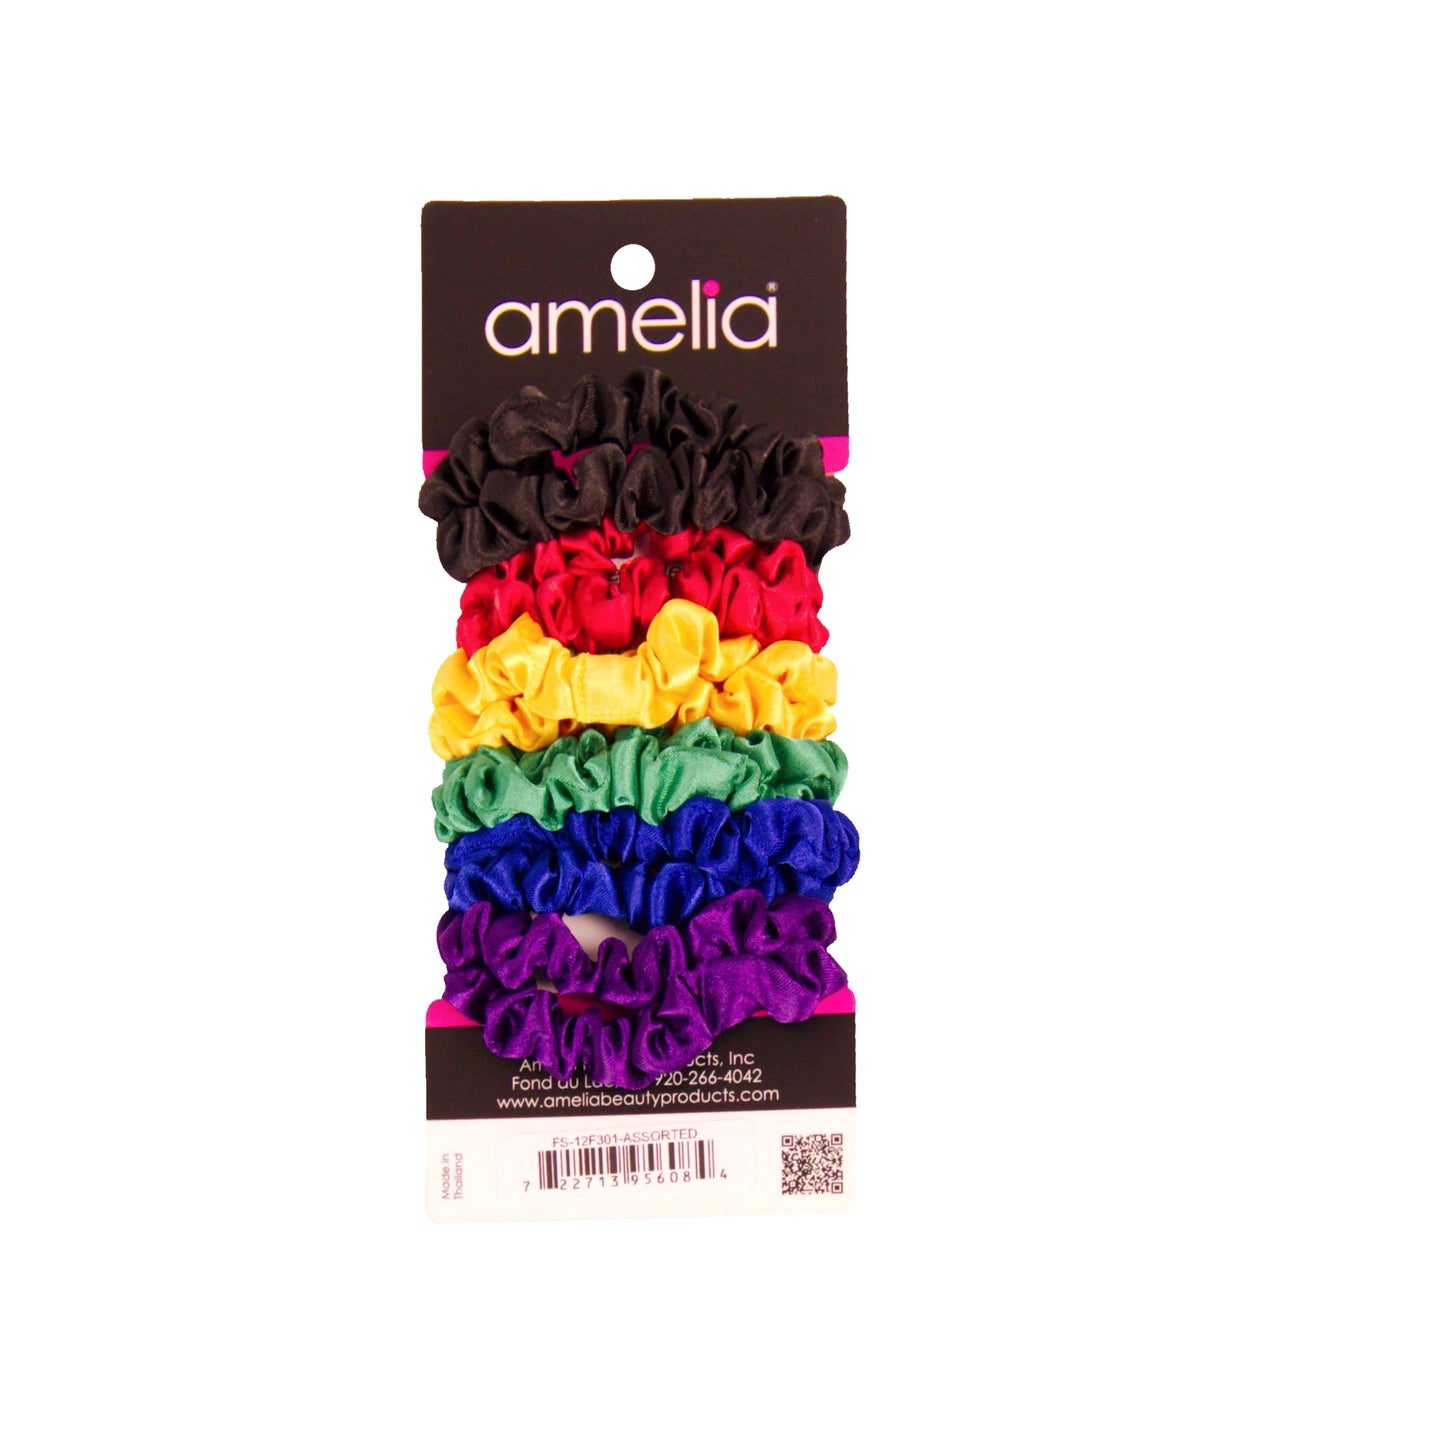 Amelia Beauty, Rainbow Colors Satin Scrunchies, 2.25in Diameter, Gentle on Hair, Strong Hold, No Snag, No Dents or Creases. 12 Pack